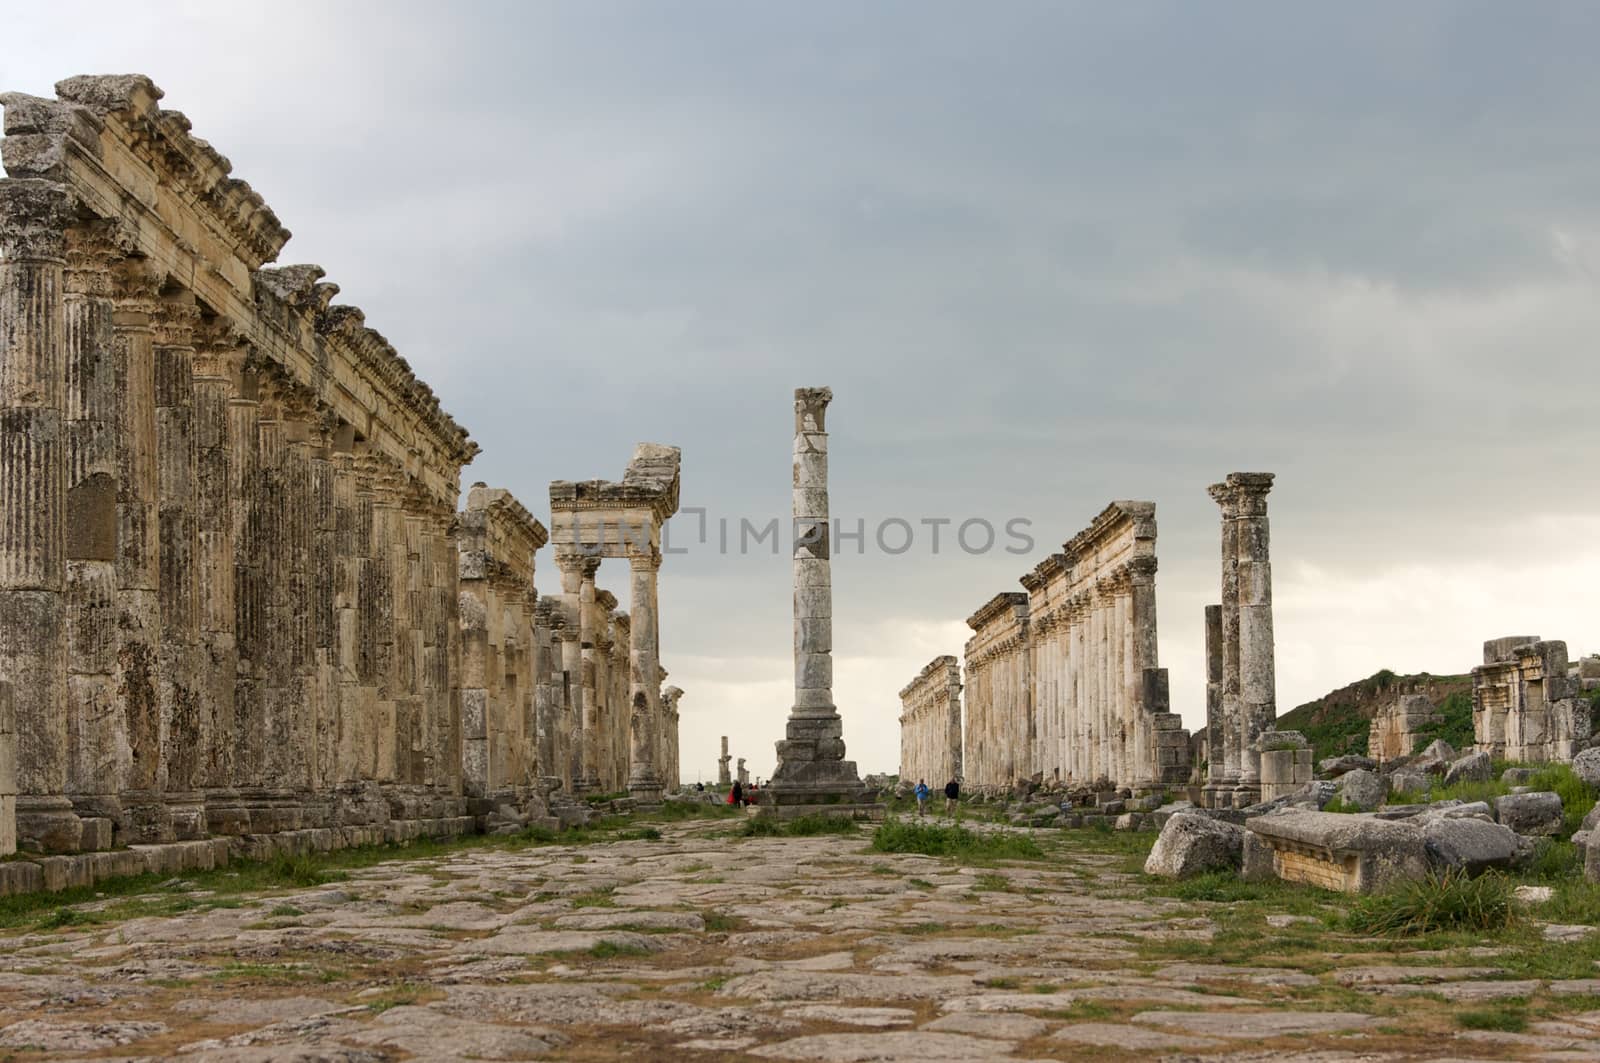 Apamea, Syria - May, 2009: Syria before the war. the Great Colonnade and triumphal arches in the impressive Apamea Greek and Roman city of Apamea in Syria. Apamea was an ancient Greek and Roman city on the banks of the Orontes River in Syria. The site includes the famous Great Colonnade, one of the longest in the world. As a result of the ongoing civil war in Syria that started in 2011, the Apamea ruins have been damaged and looted by treasure hunters.